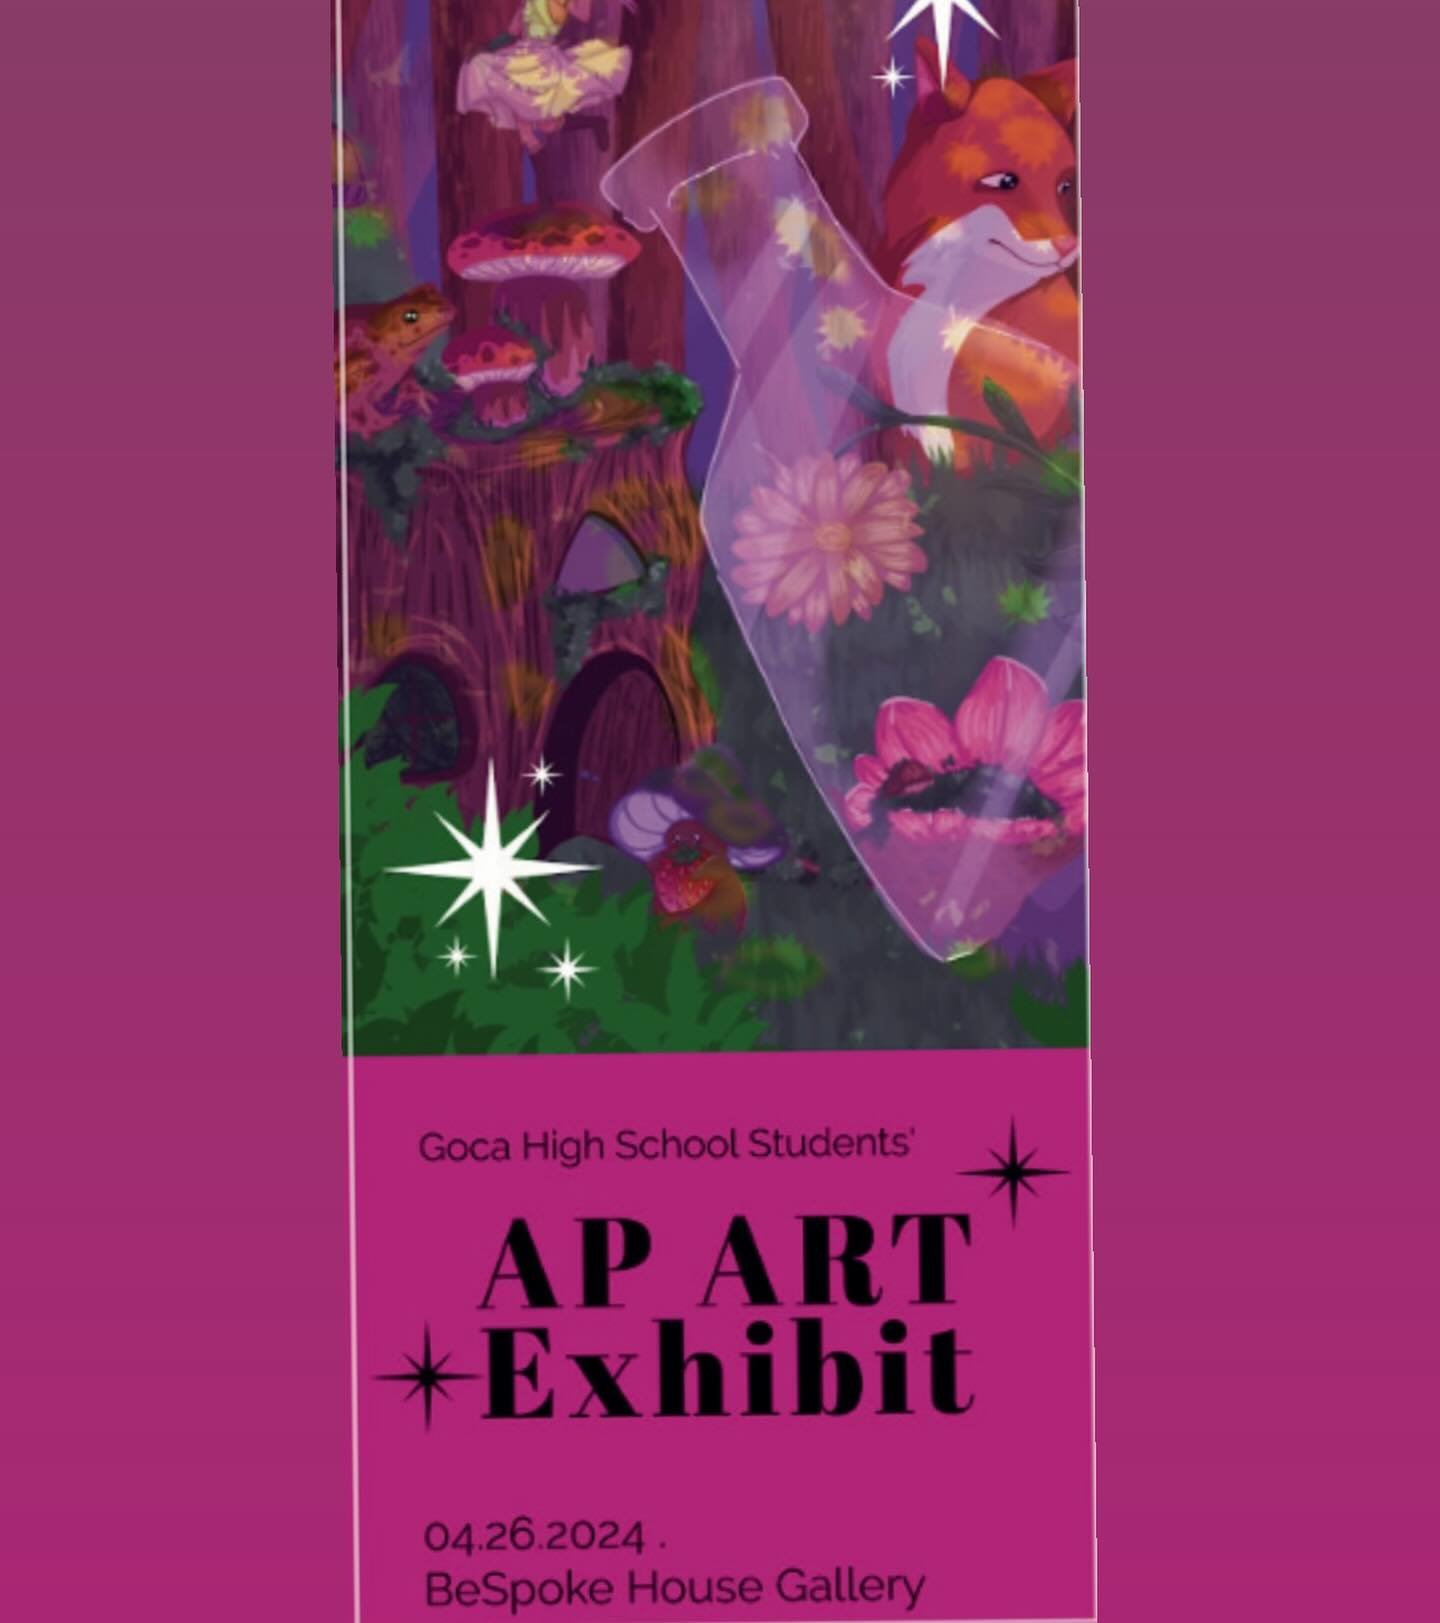 Tonight is THE night for AP Art students! Please stop by the Bespoke House in Murray Hill from 5 to 7 to witness the culmination of 8 months worth of their hard work 🎨🖌️🖼️